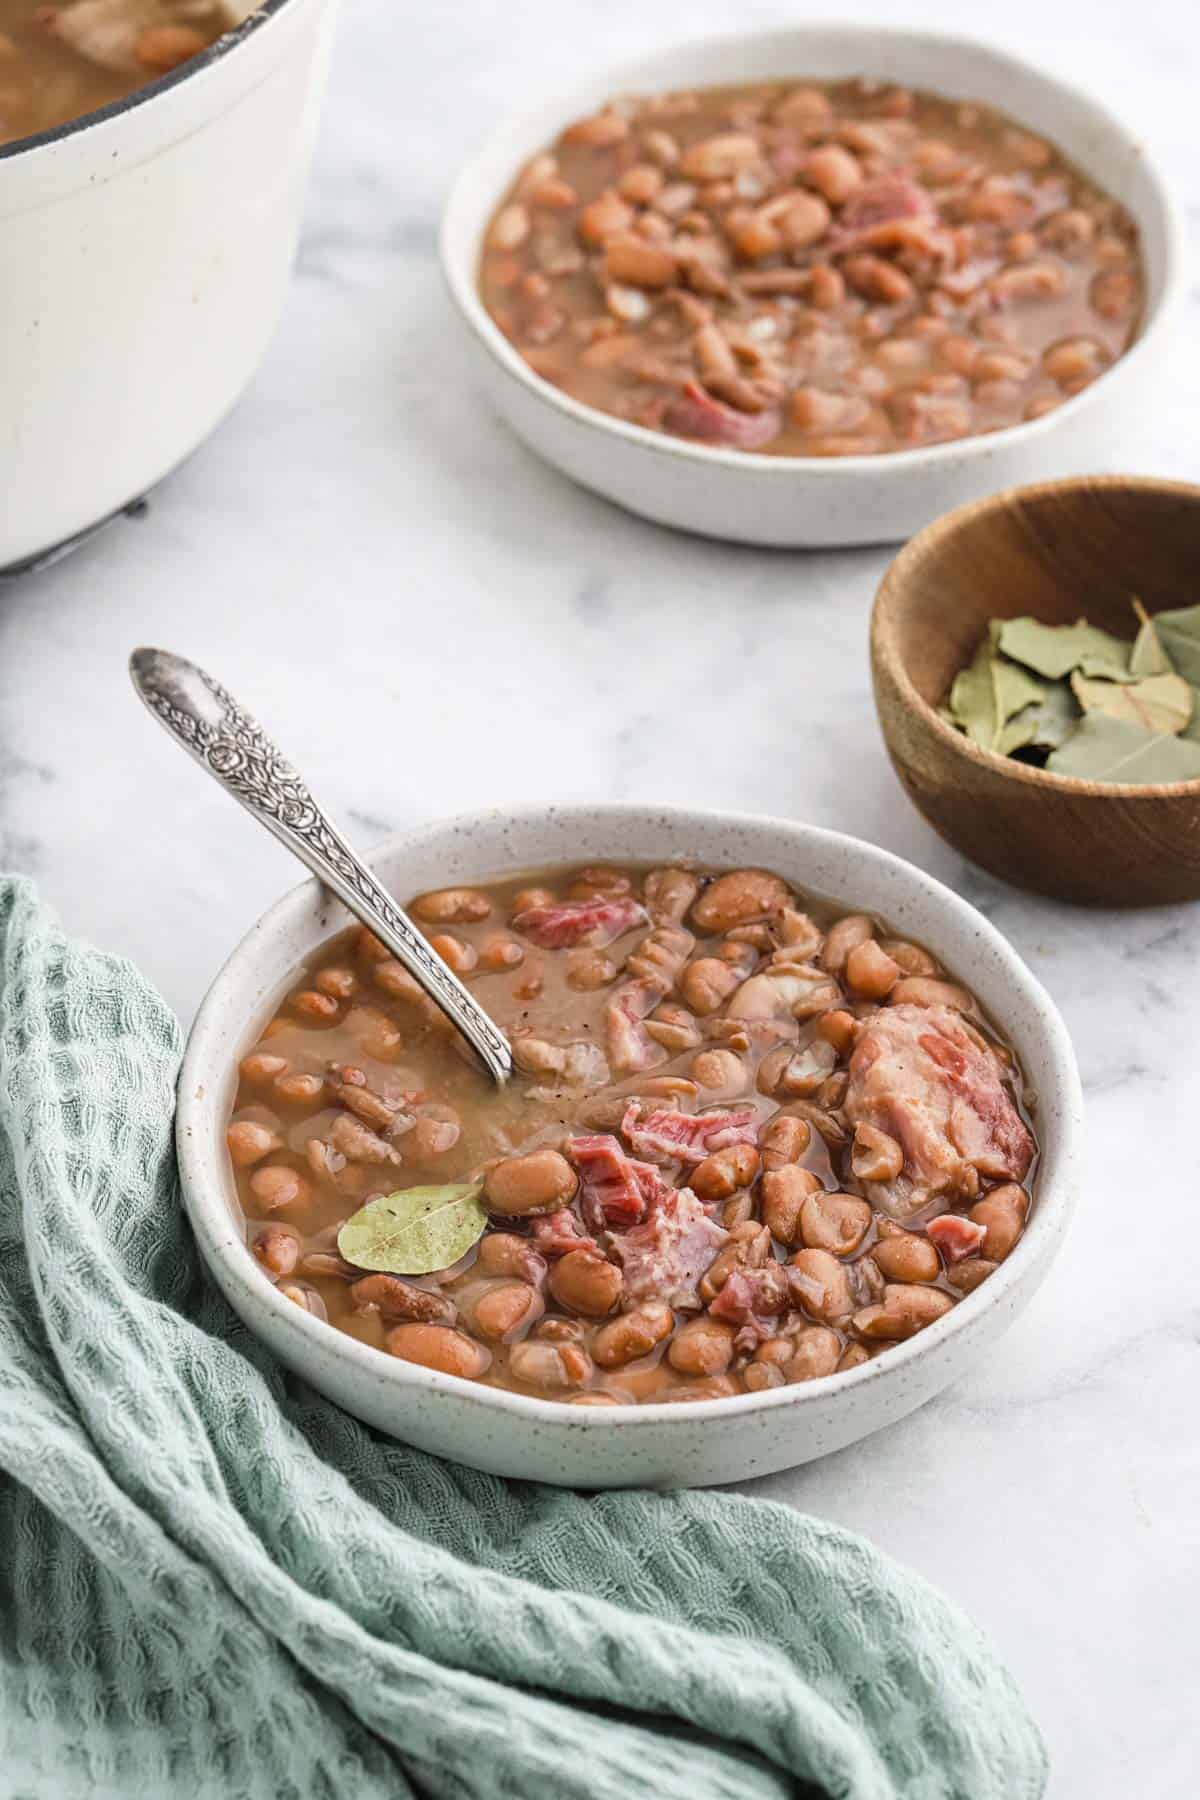 Overhead shot of a large white bowl of pinto beans with ham hock and bay leaf